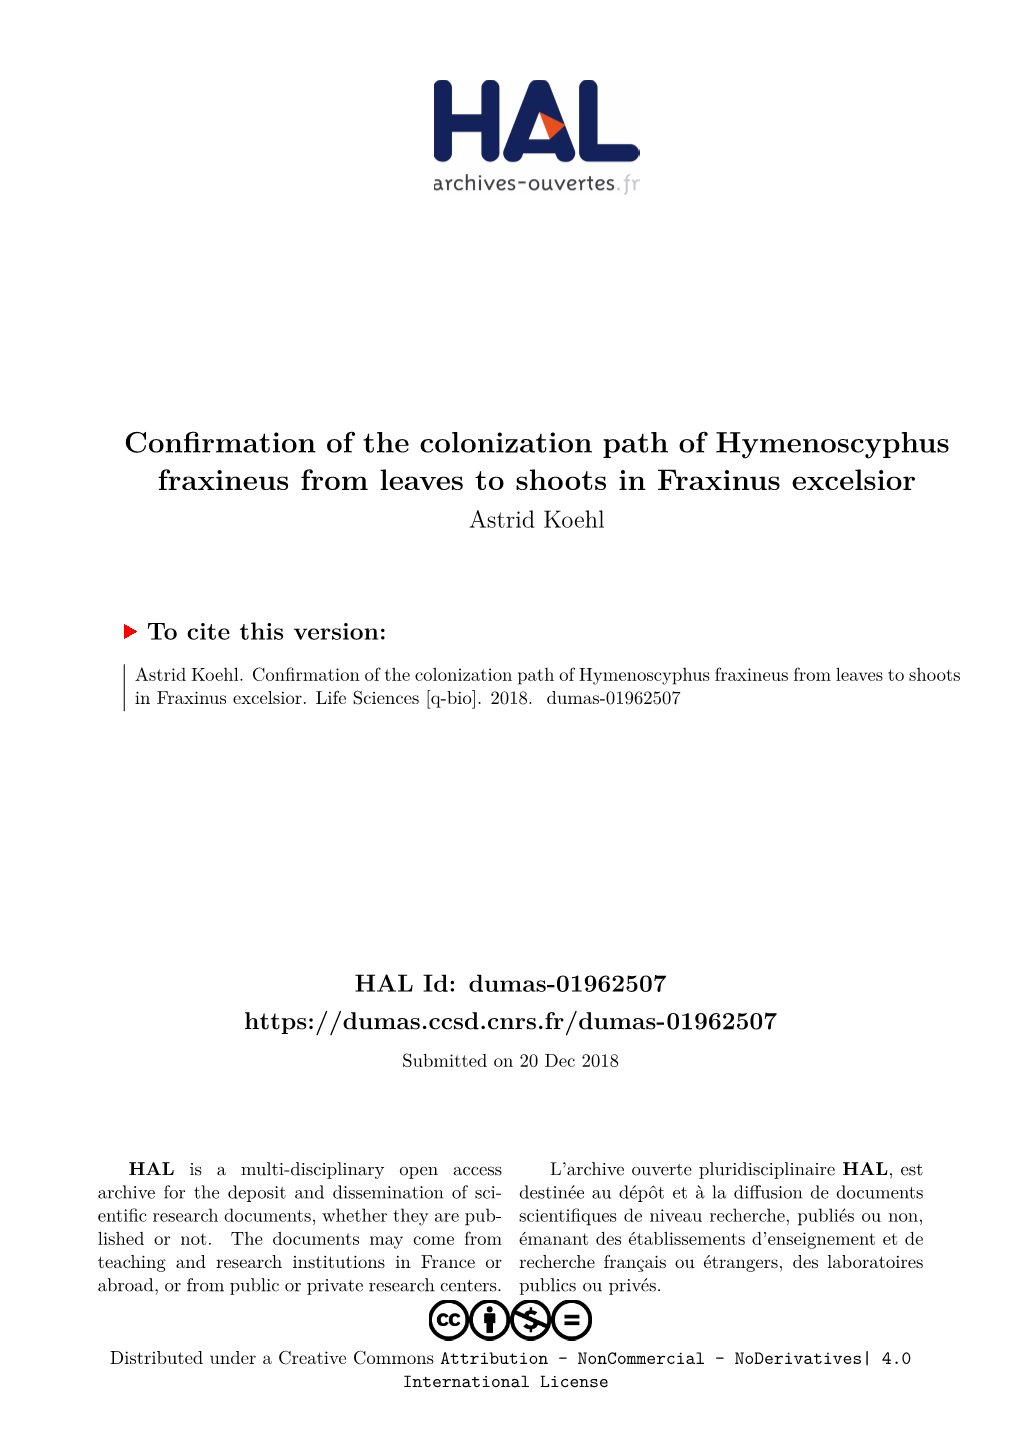 Confirmation of the Colonization Path of Hymenoscyphus Fraxineus from Leaves to Shoots in Fraxinus Excelsior Astrid Koehl